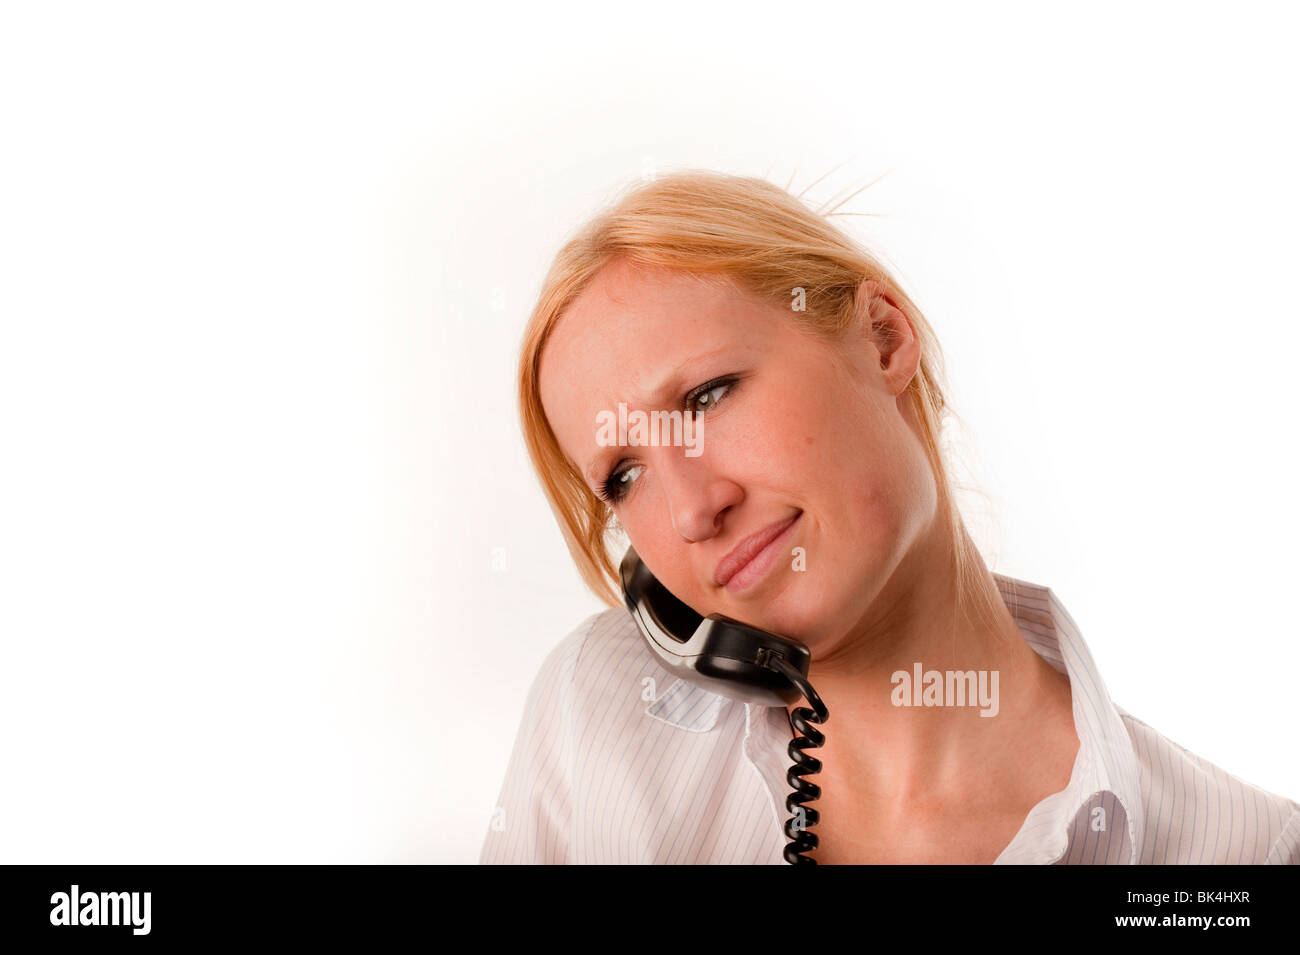 Phone under neck causing pain FULLY MODEL RELEASED Stock Photo